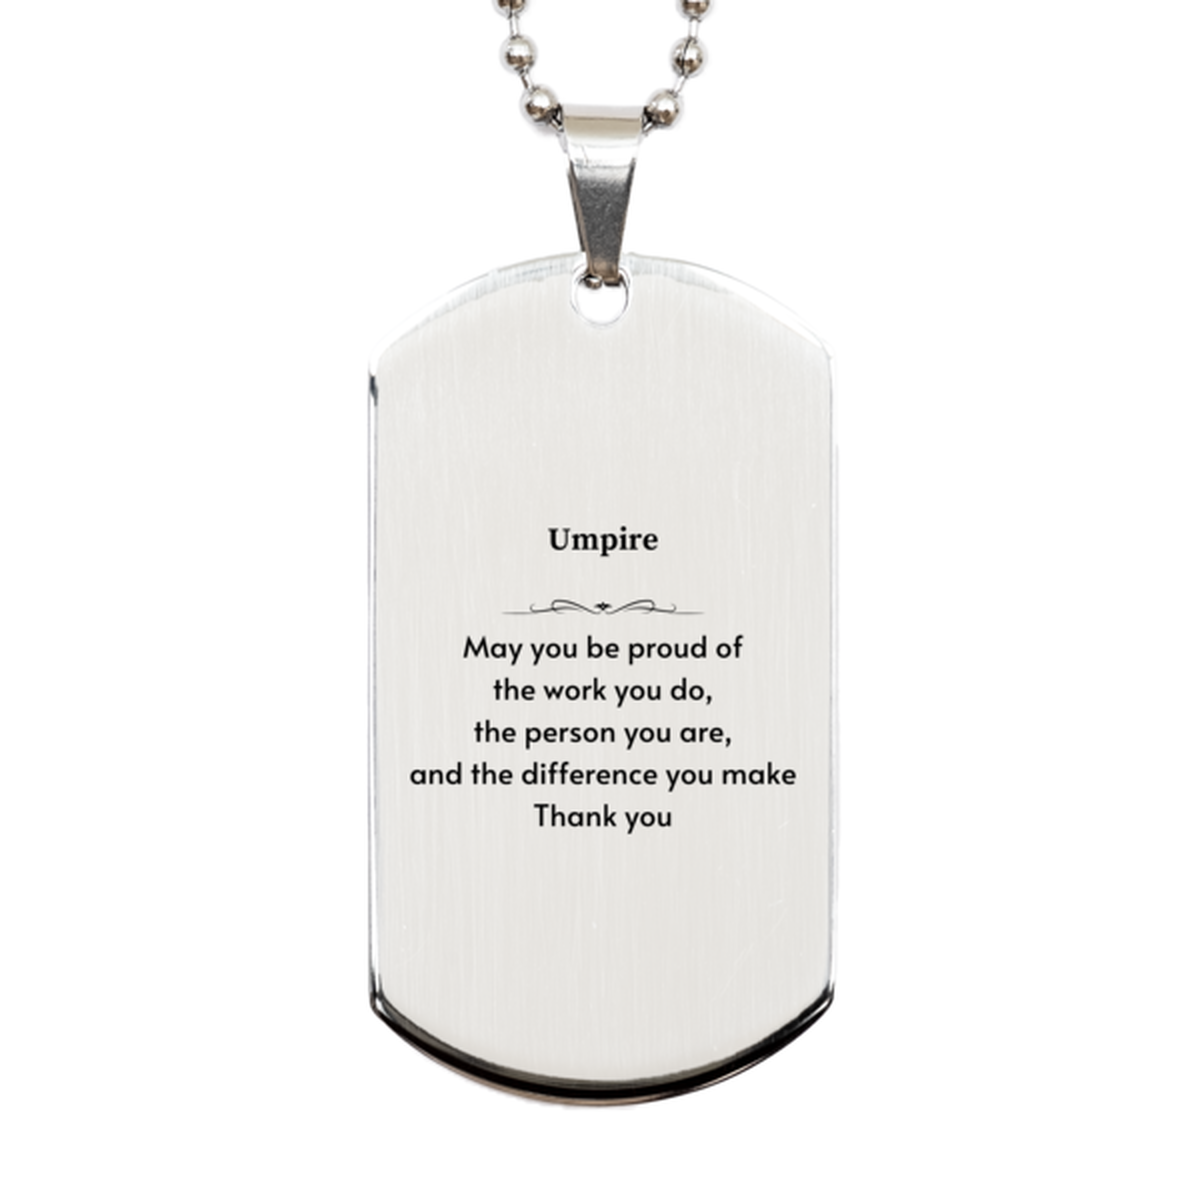 Heartwarming Silver Dog Tag Retirement Coworkers Gifts for Umpire, Umpire May You be proud of the work you do, the person you are Gifts for Boss Men Women Friends